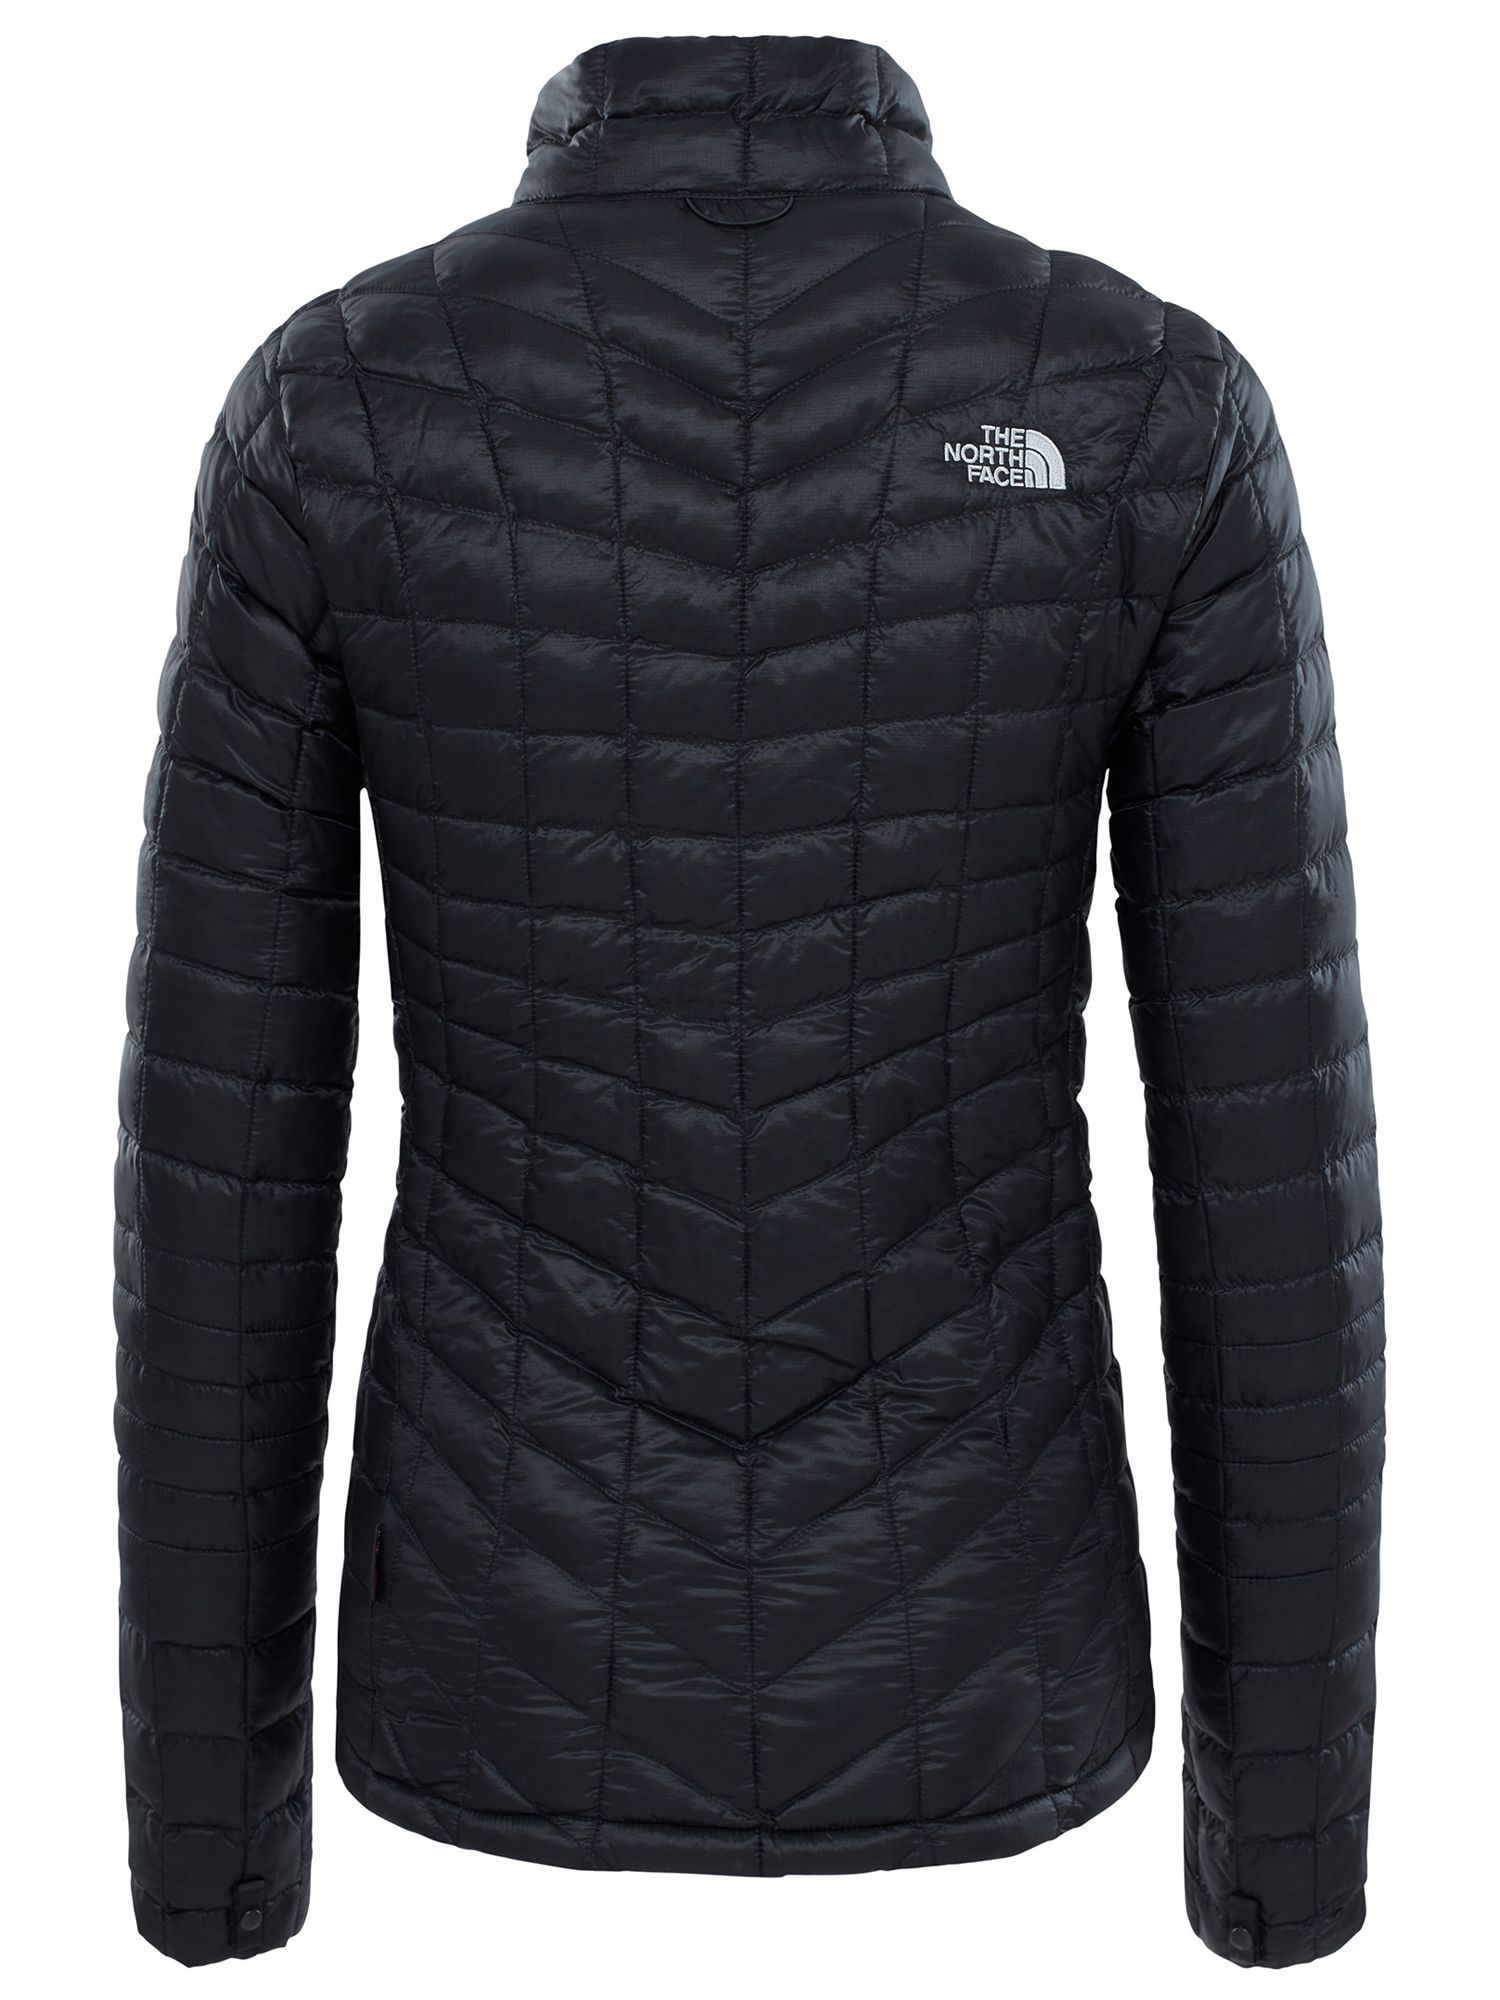 The North Face Thermoball Full-Zip Women's Insulated Jacket, Black